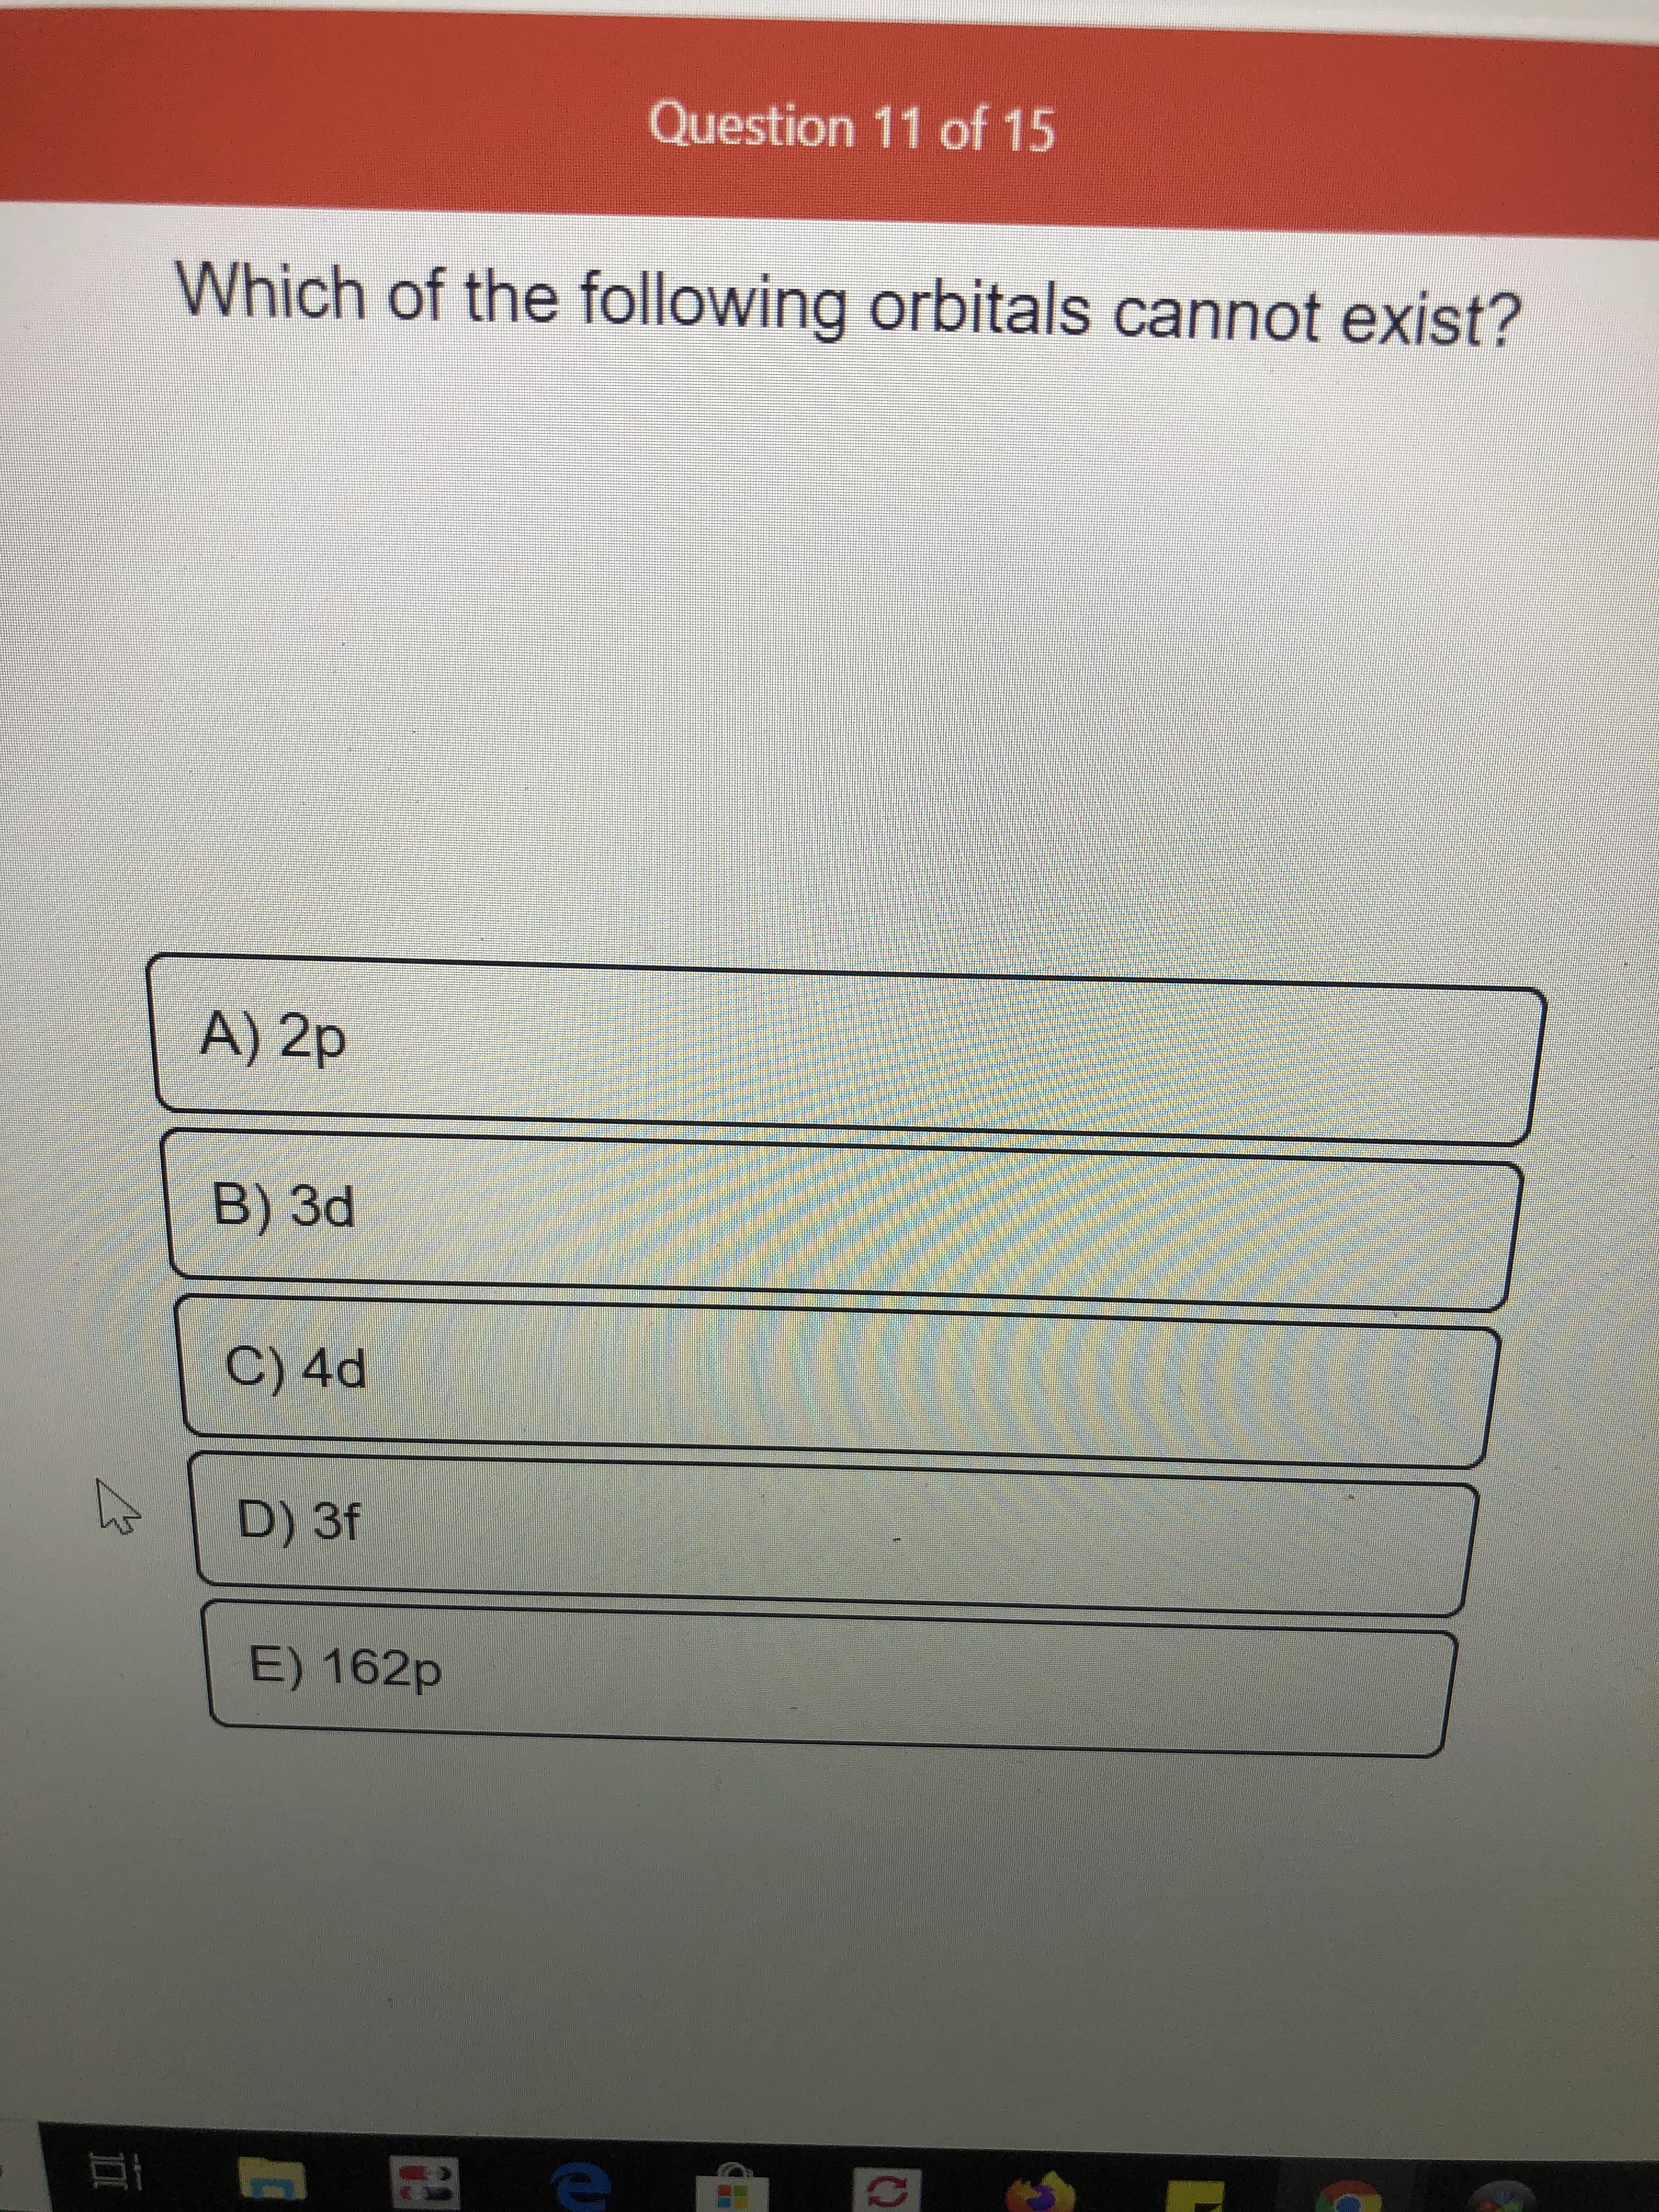 Which of the following orbitals cannot exist?
